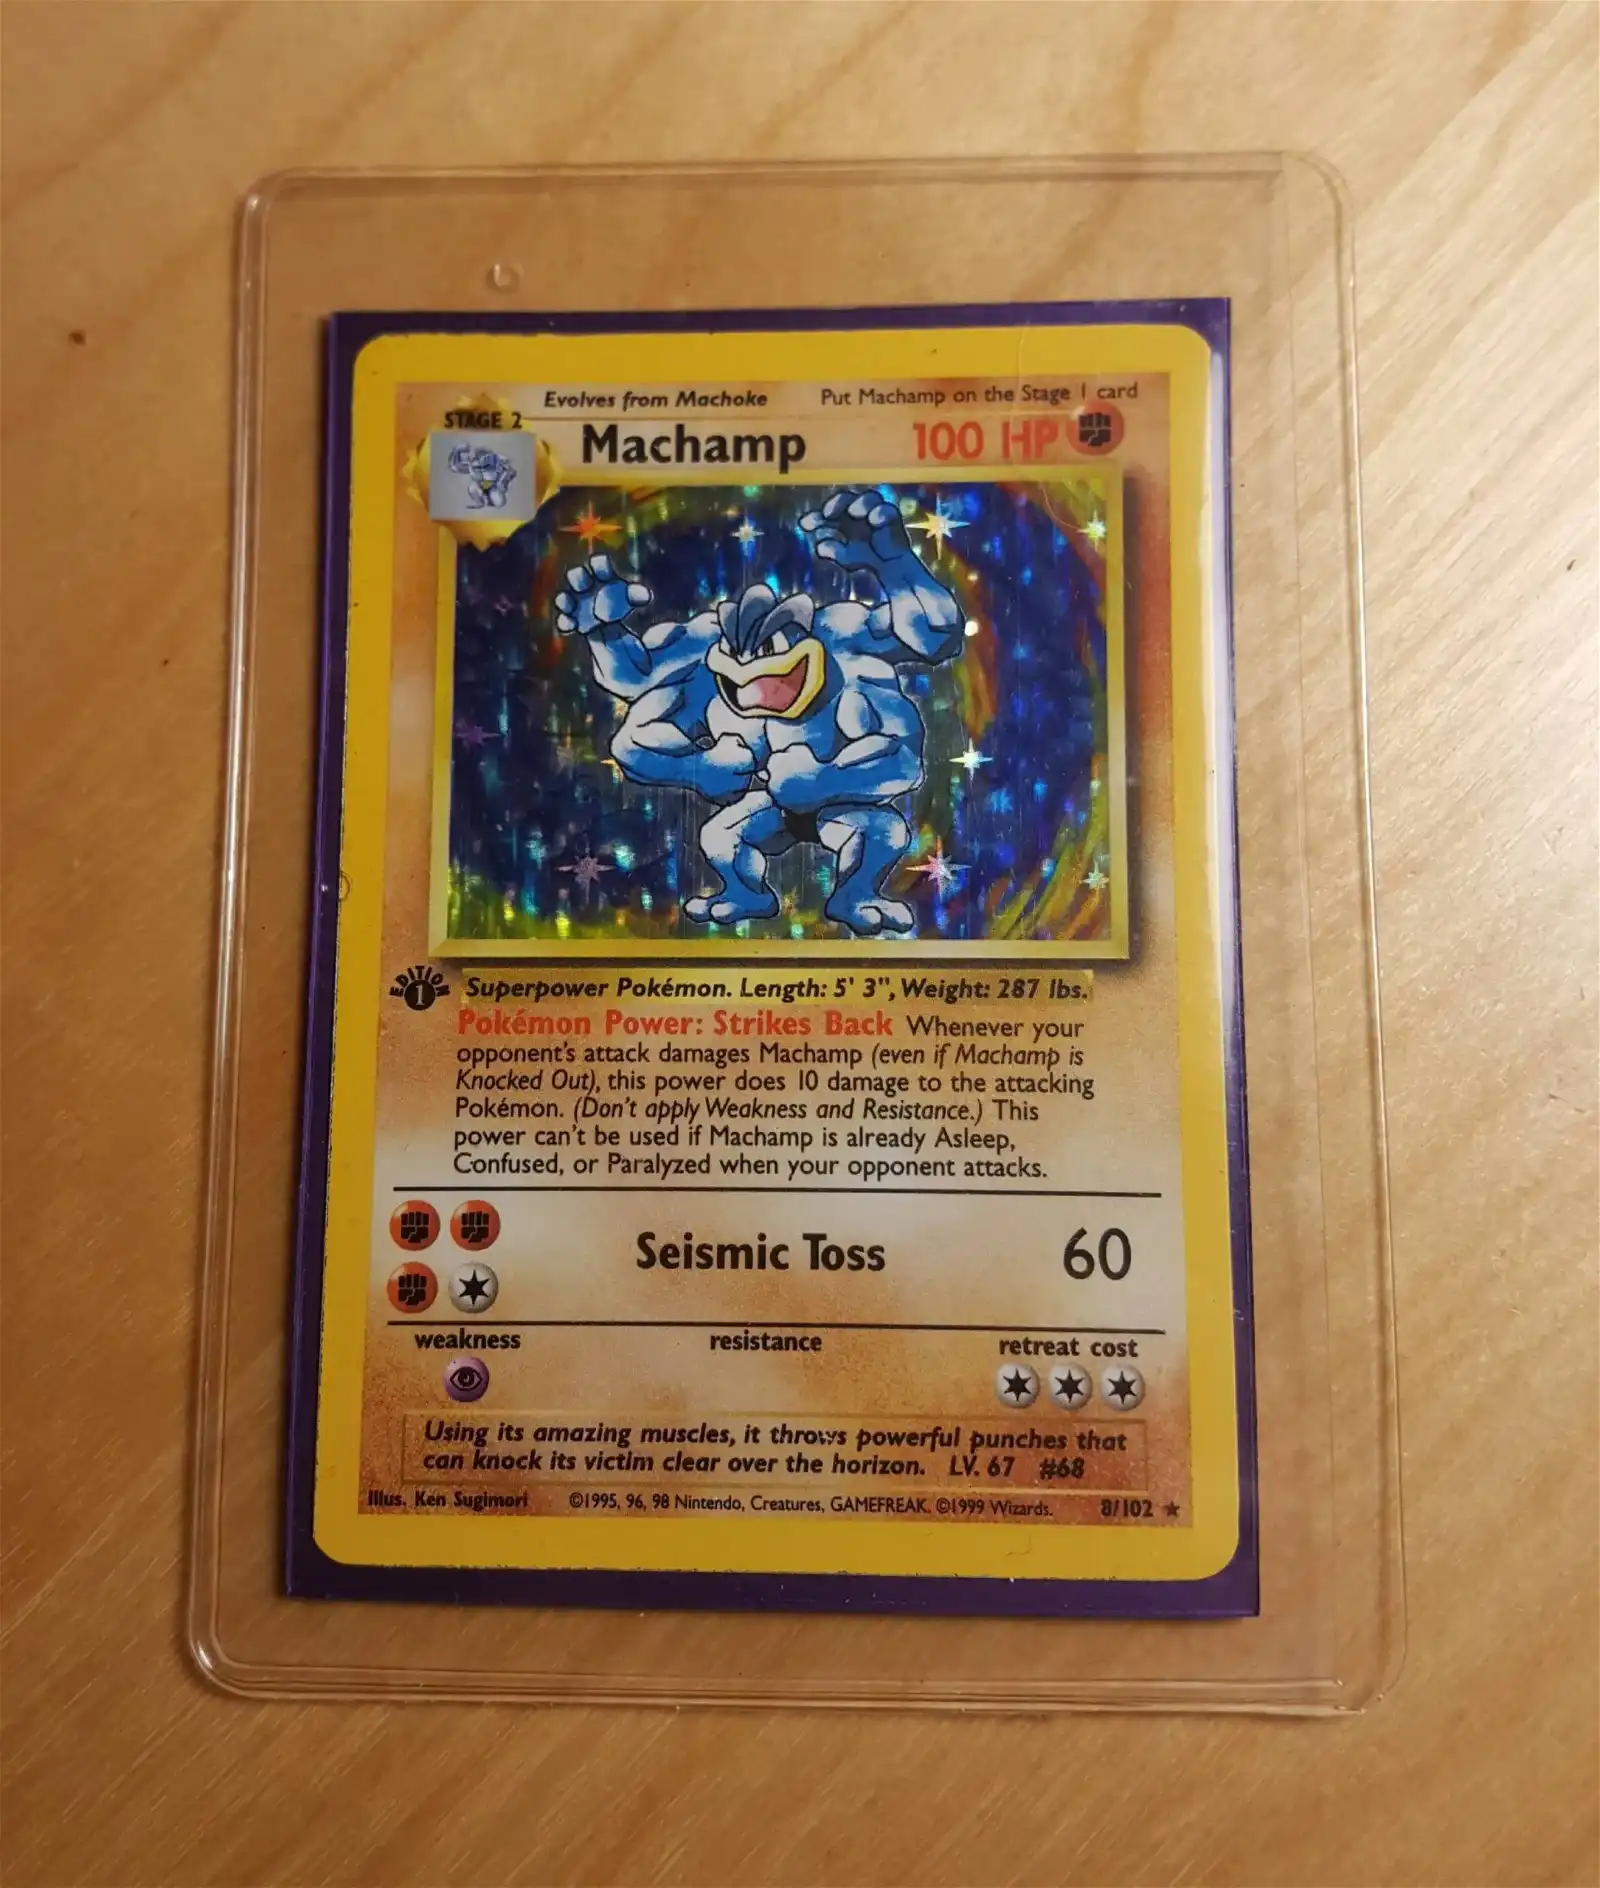 Bought a box of old Pokemon cards for $5 and found this ...